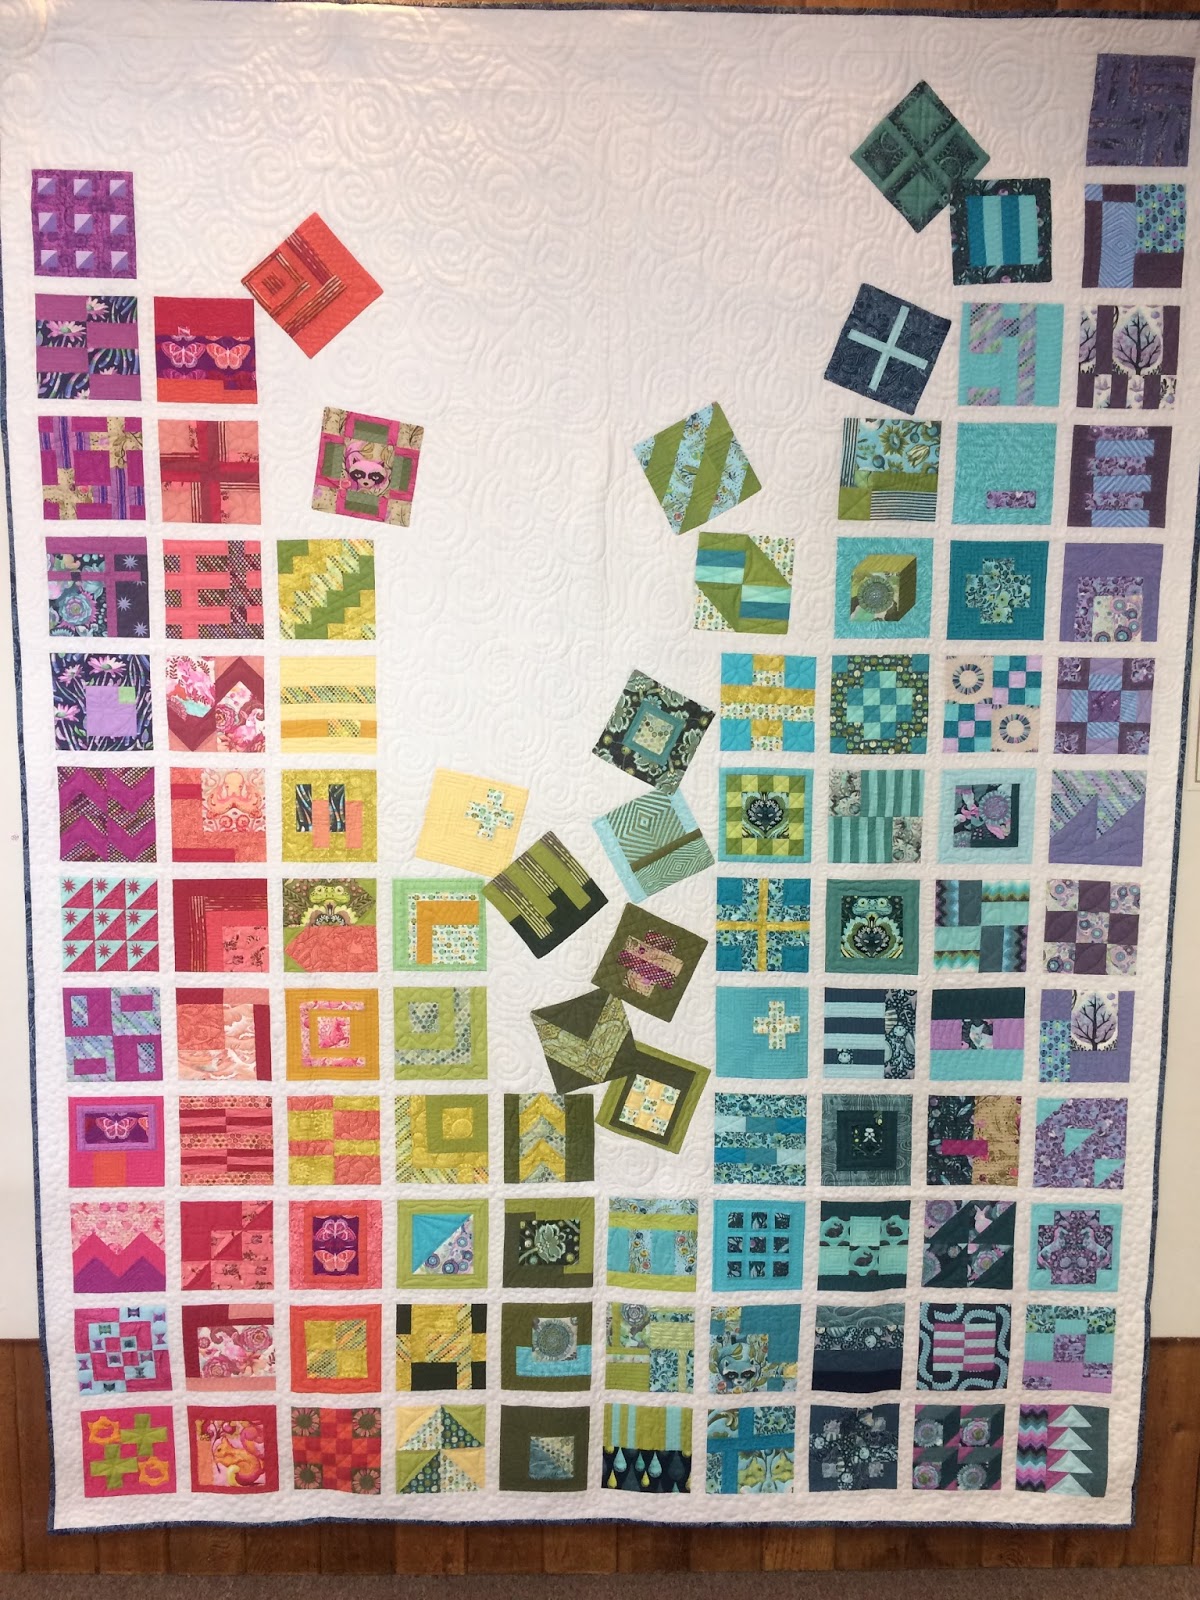 Humble Quilts: First Friday Exhibit at Quiltworks